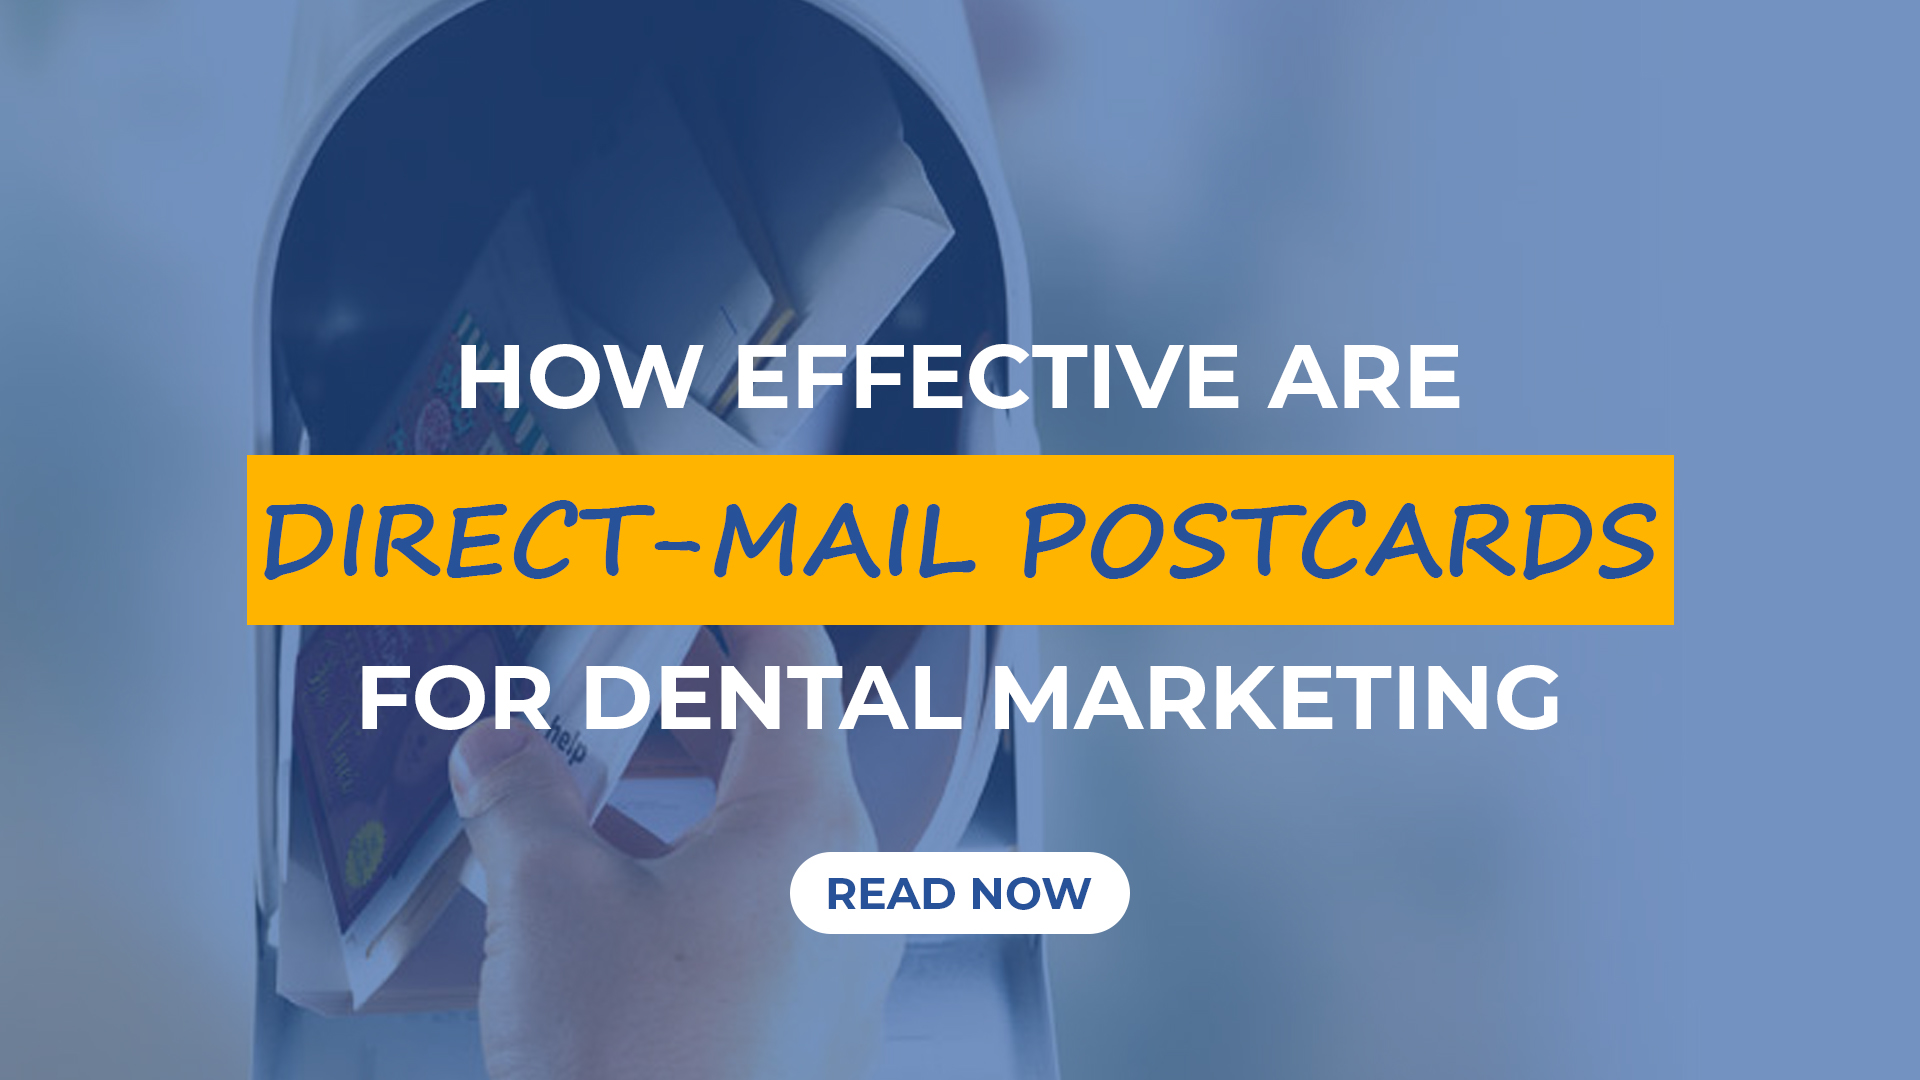 How Effective are Direct-mail Postcards for Dental Marketing?